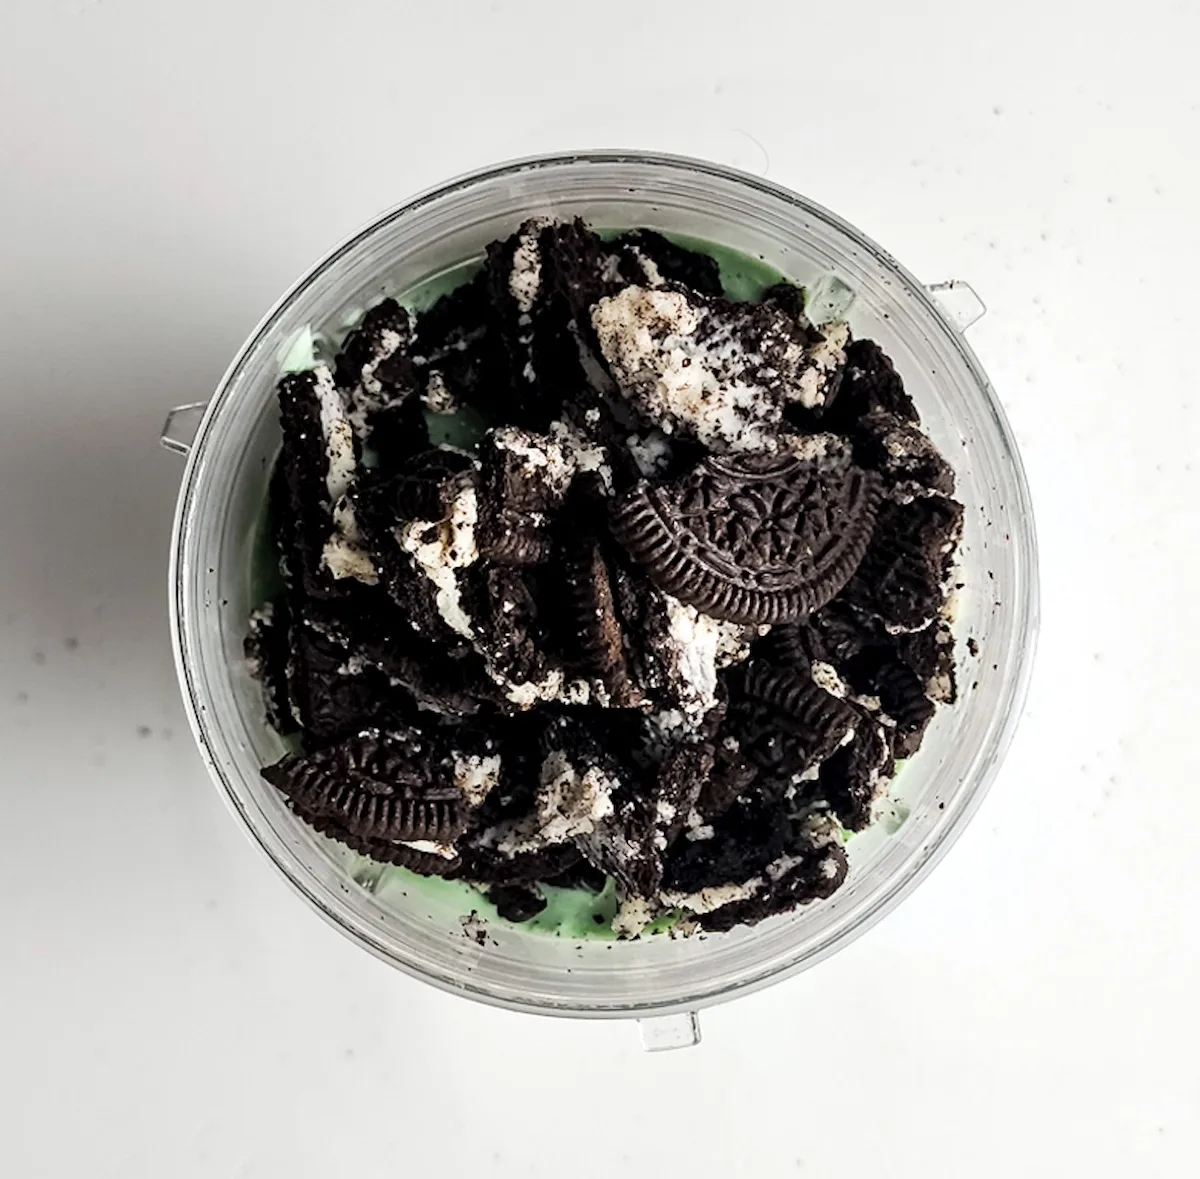 Crushed oreo added to the glass